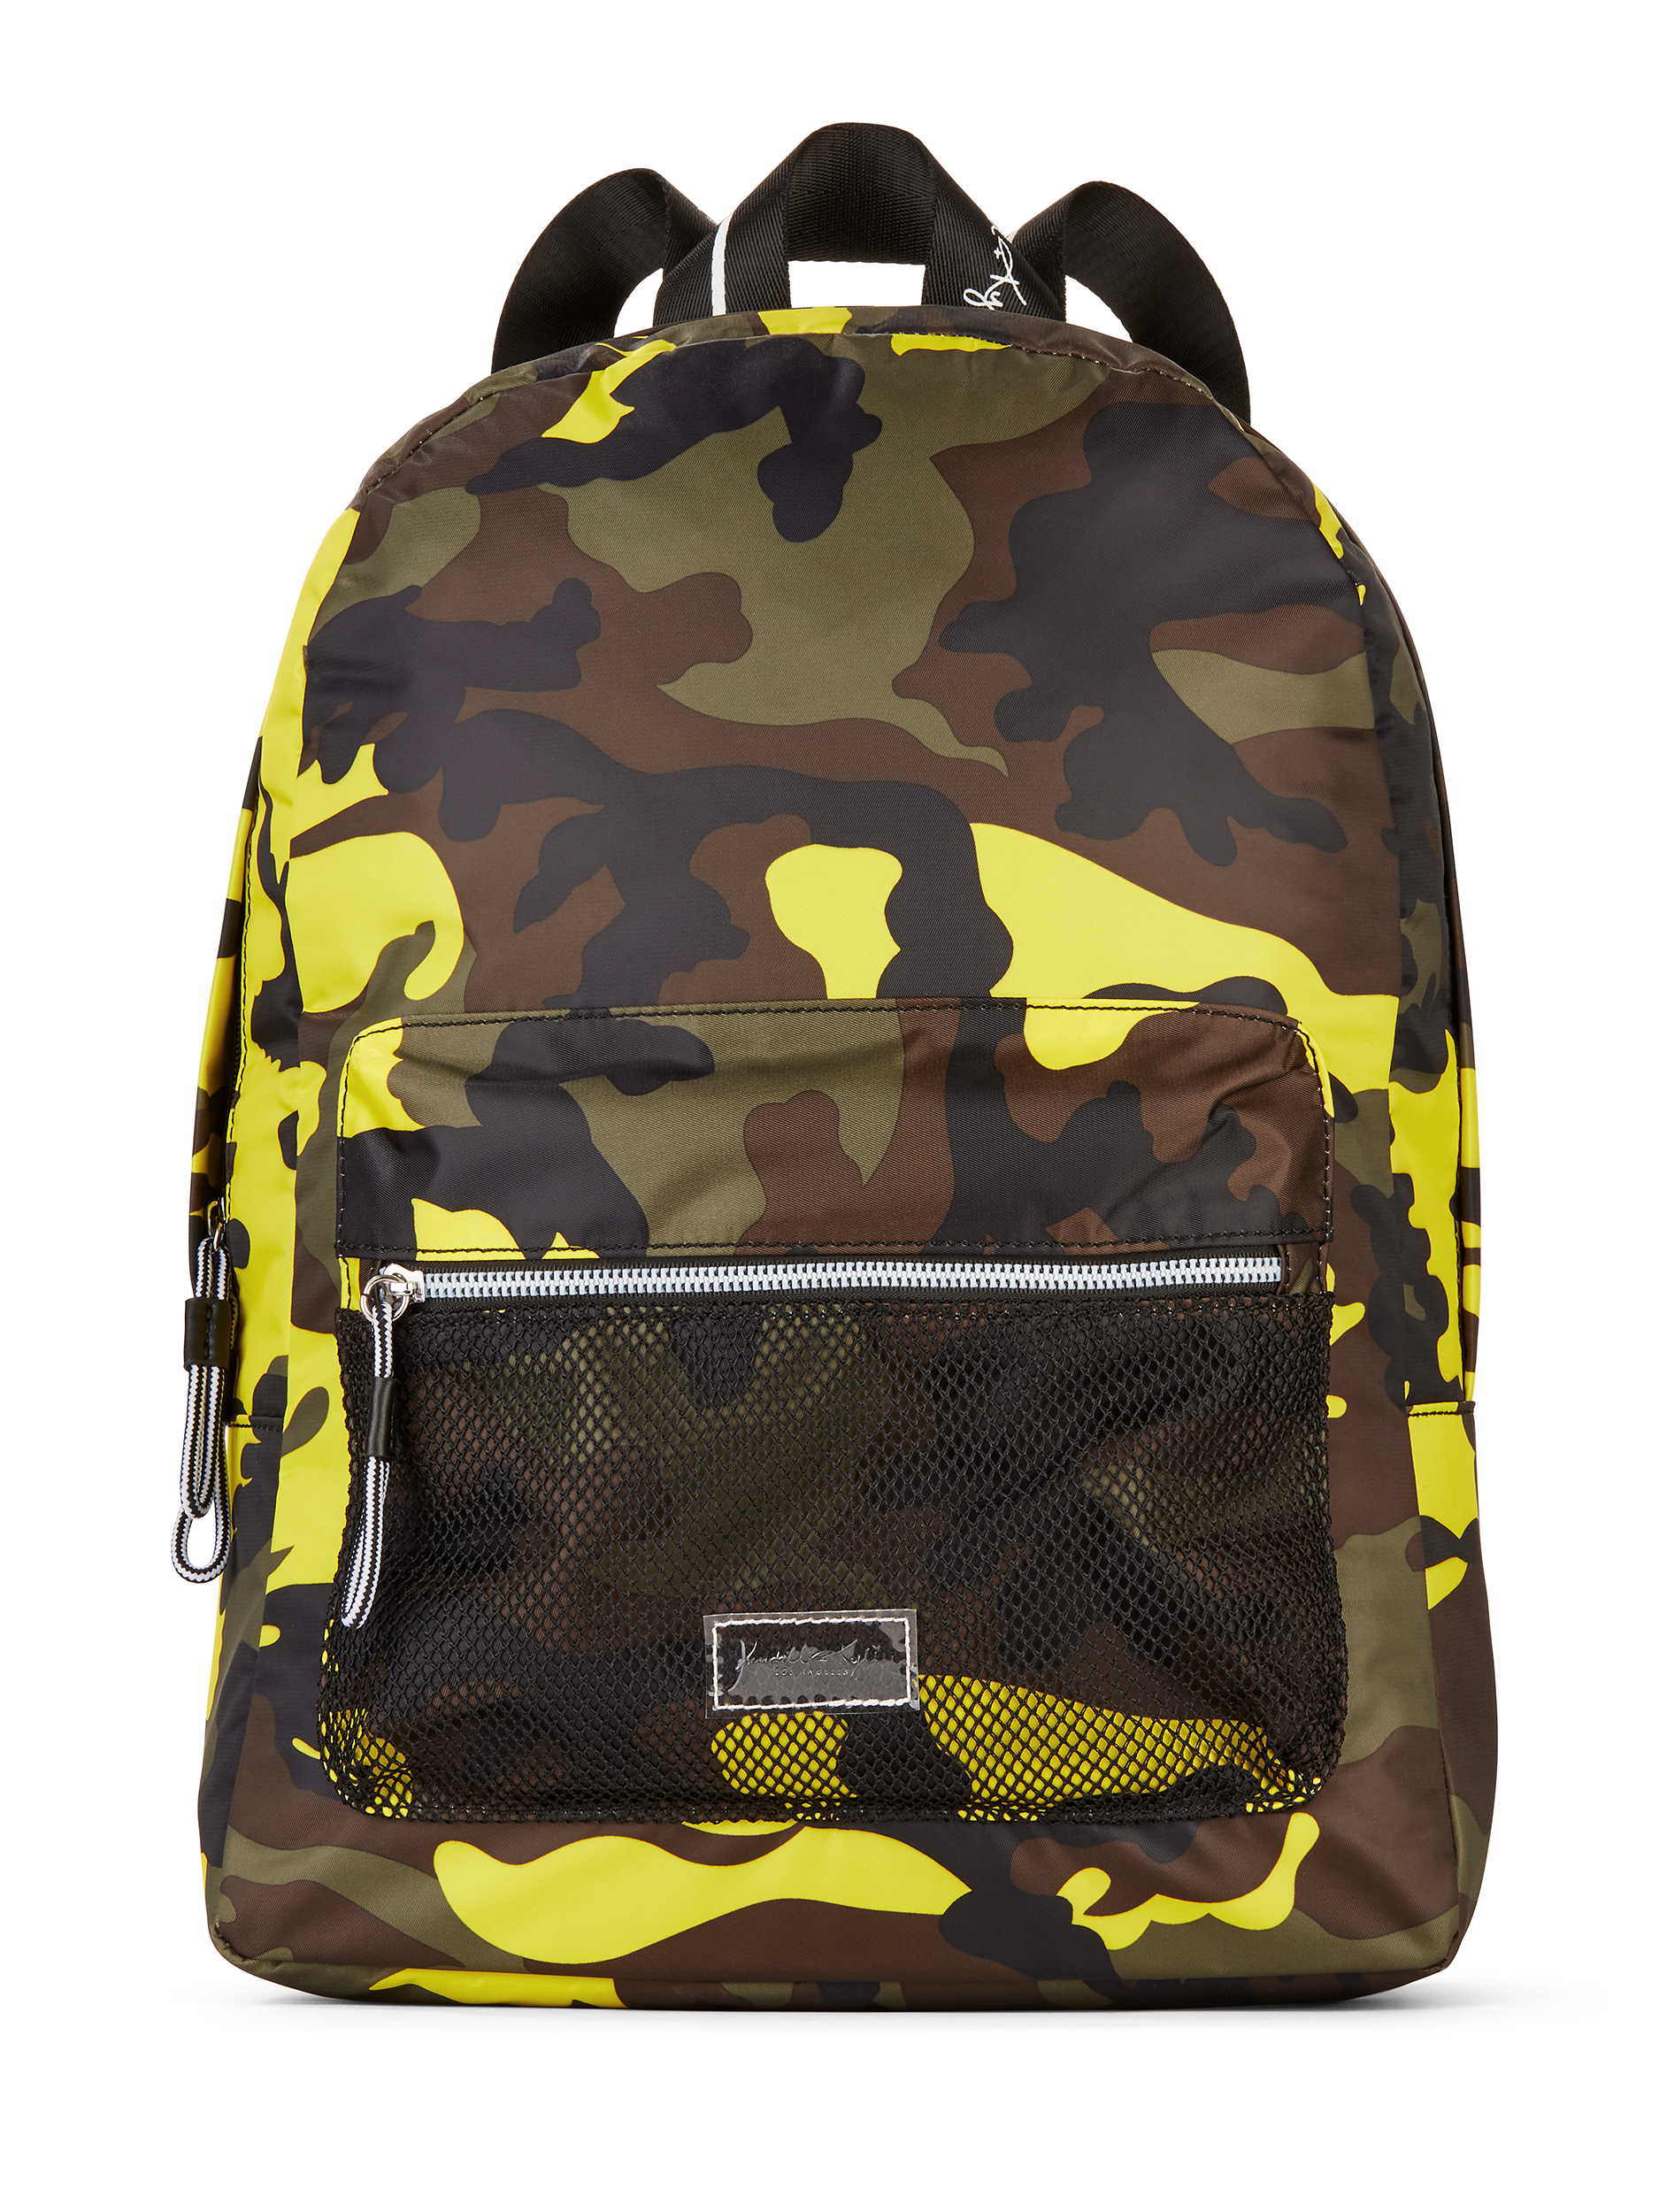 Kendall + Kylie for Walmart Multi Camo Large Backpack - image 1 of 5